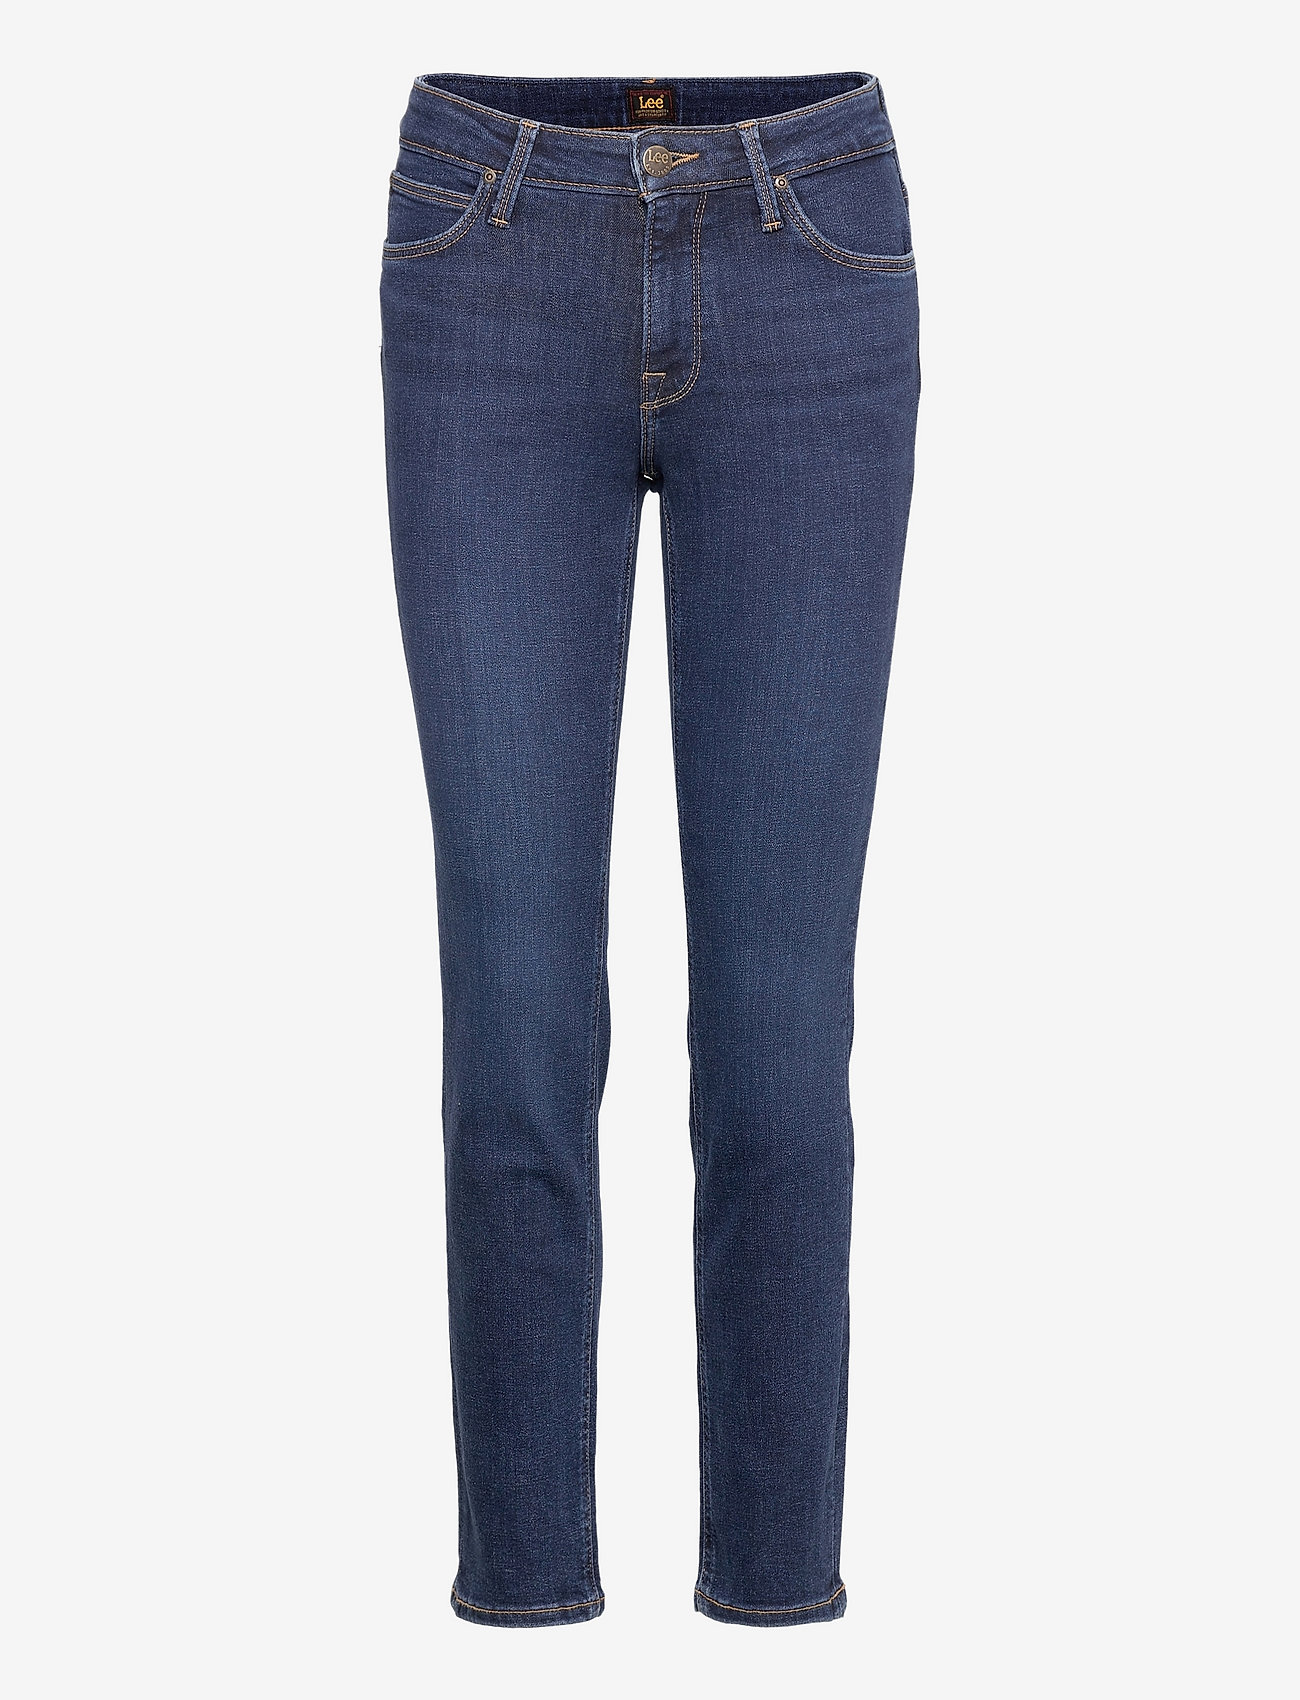 Lee Jeans - ELLY - slim fit jeans - dark daisy - 0